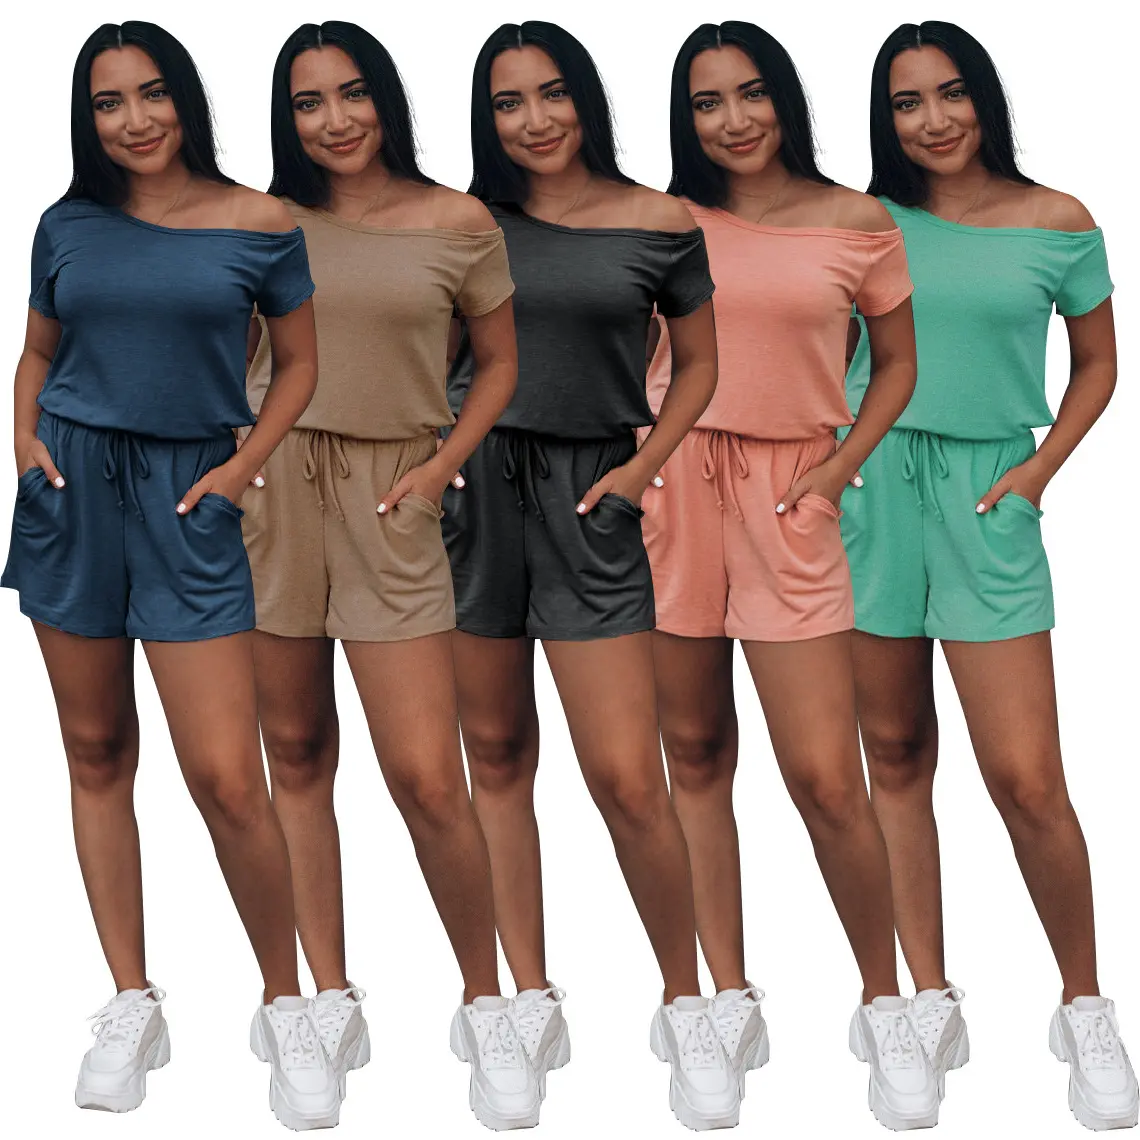 European American new fashion solid color women's suit casual two piece shorts set for summer